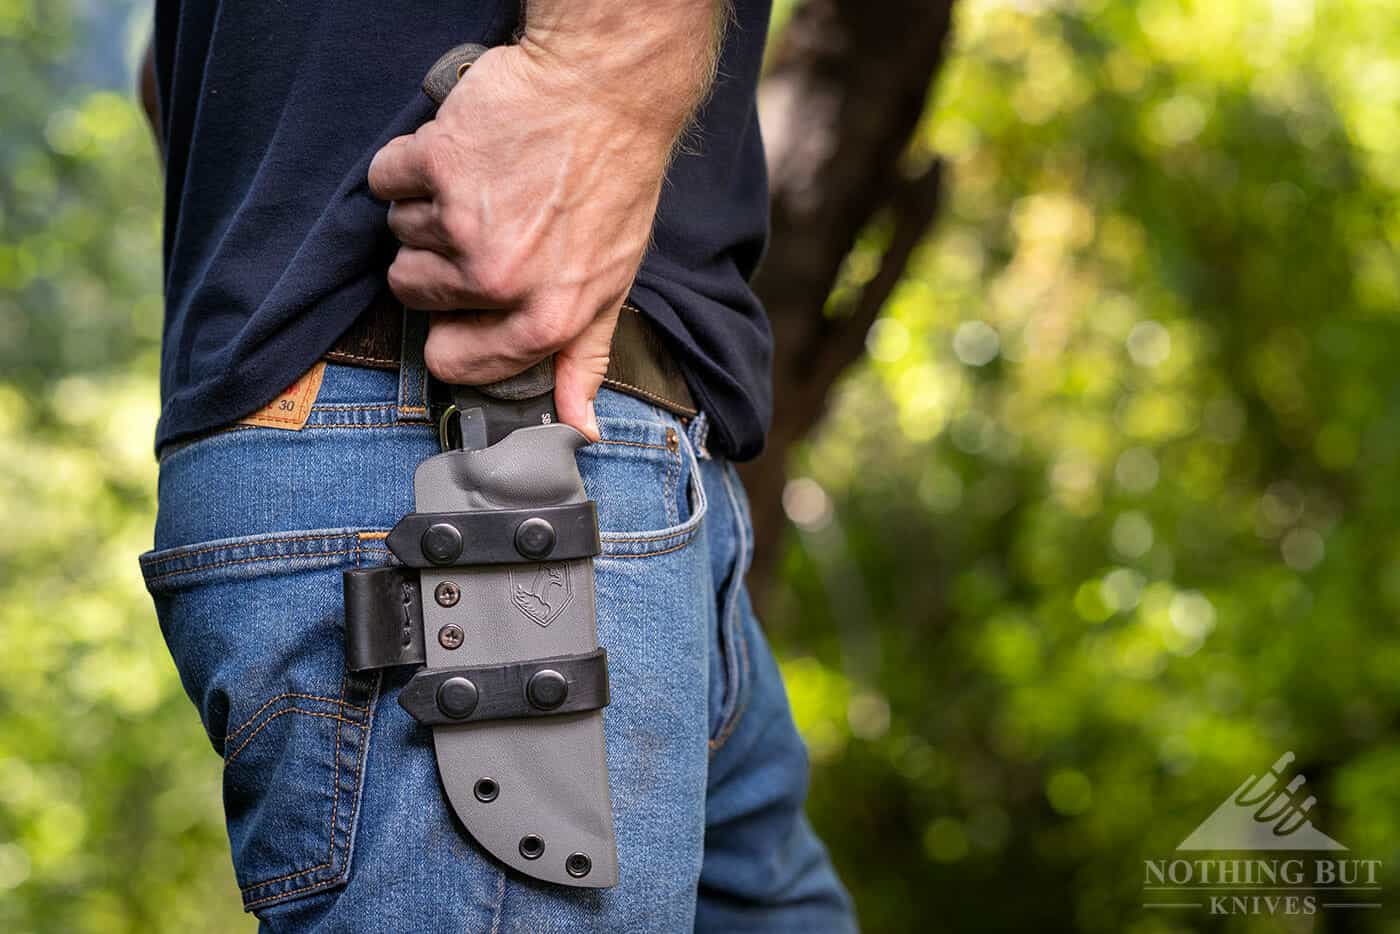 The Condor SBK sheath is one of the best sheaths ever designed for a survival or bushcraft knife. 